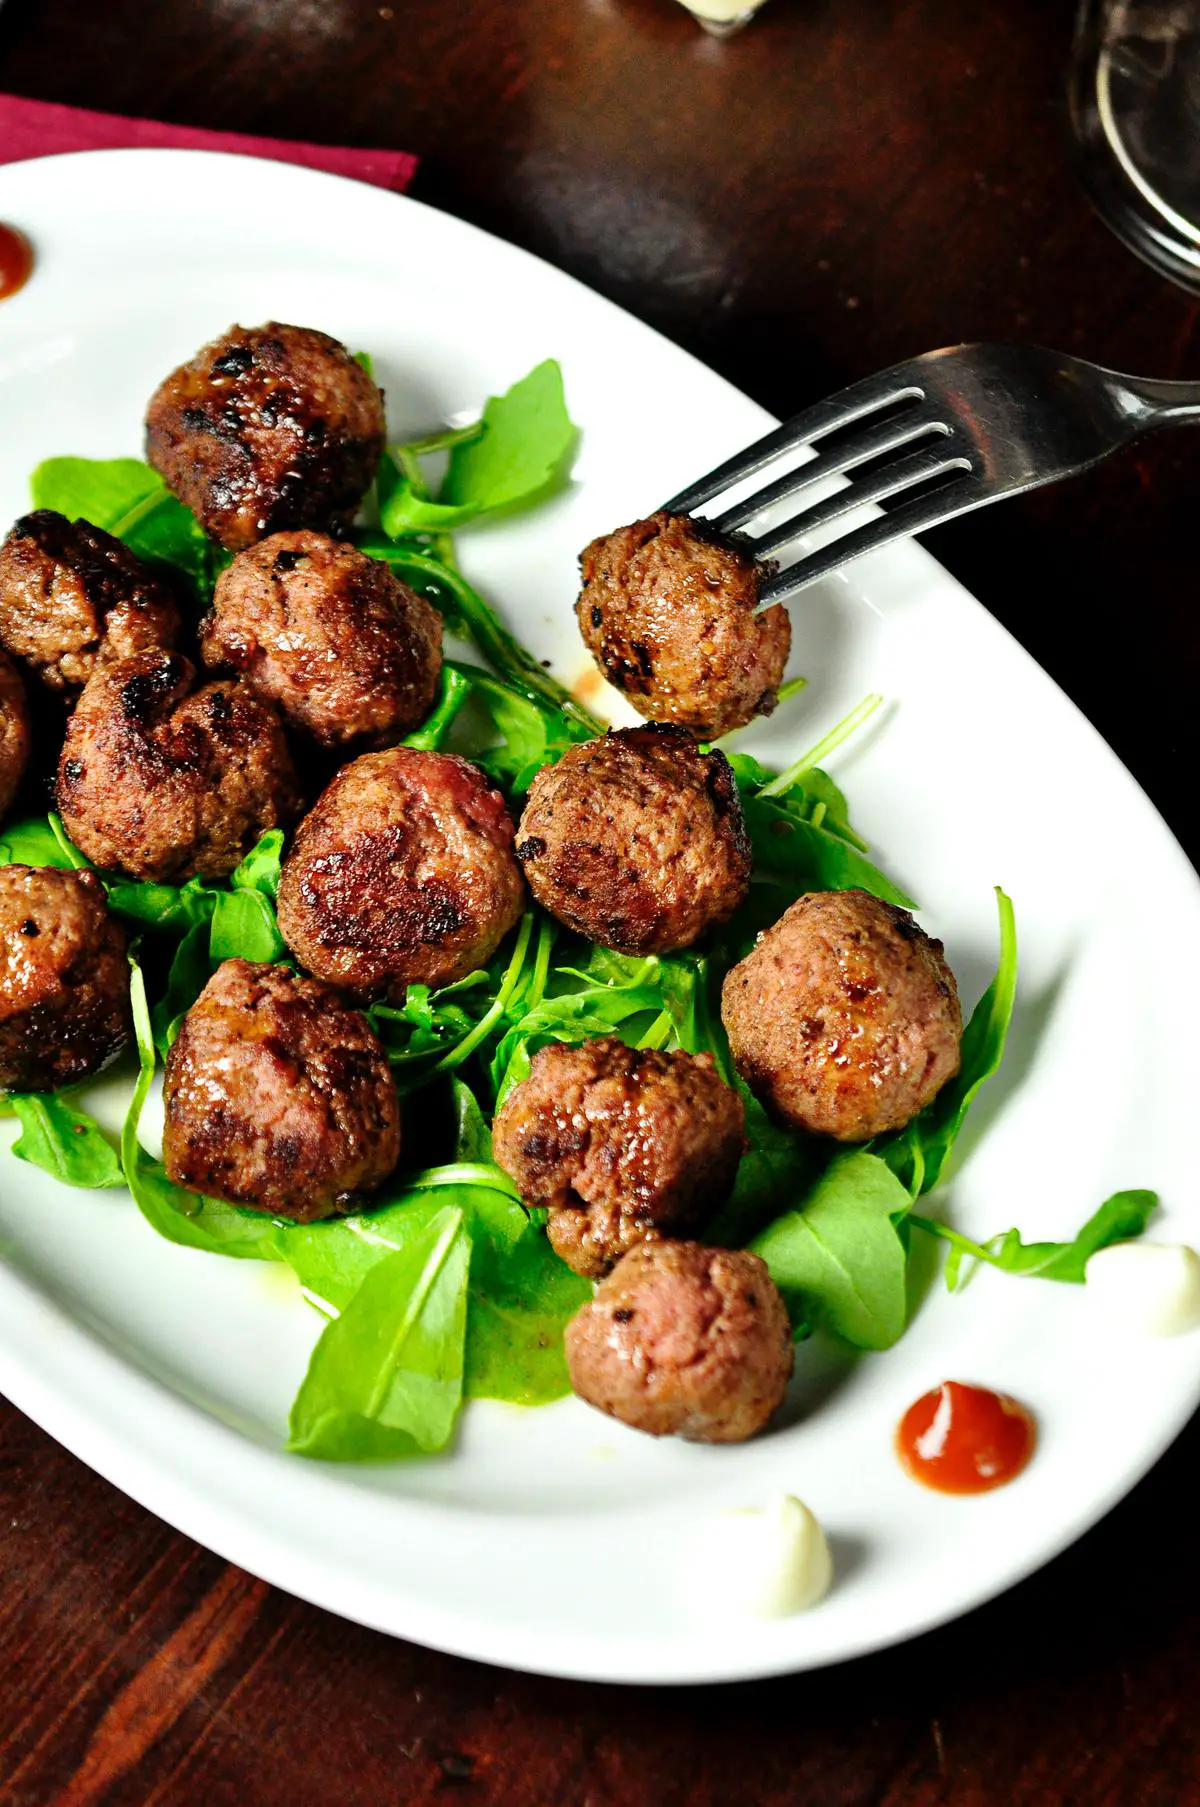 A variety of fresh food items from IKEA's online food market, including meatballs, cheese, salmon, and vegetarian options.